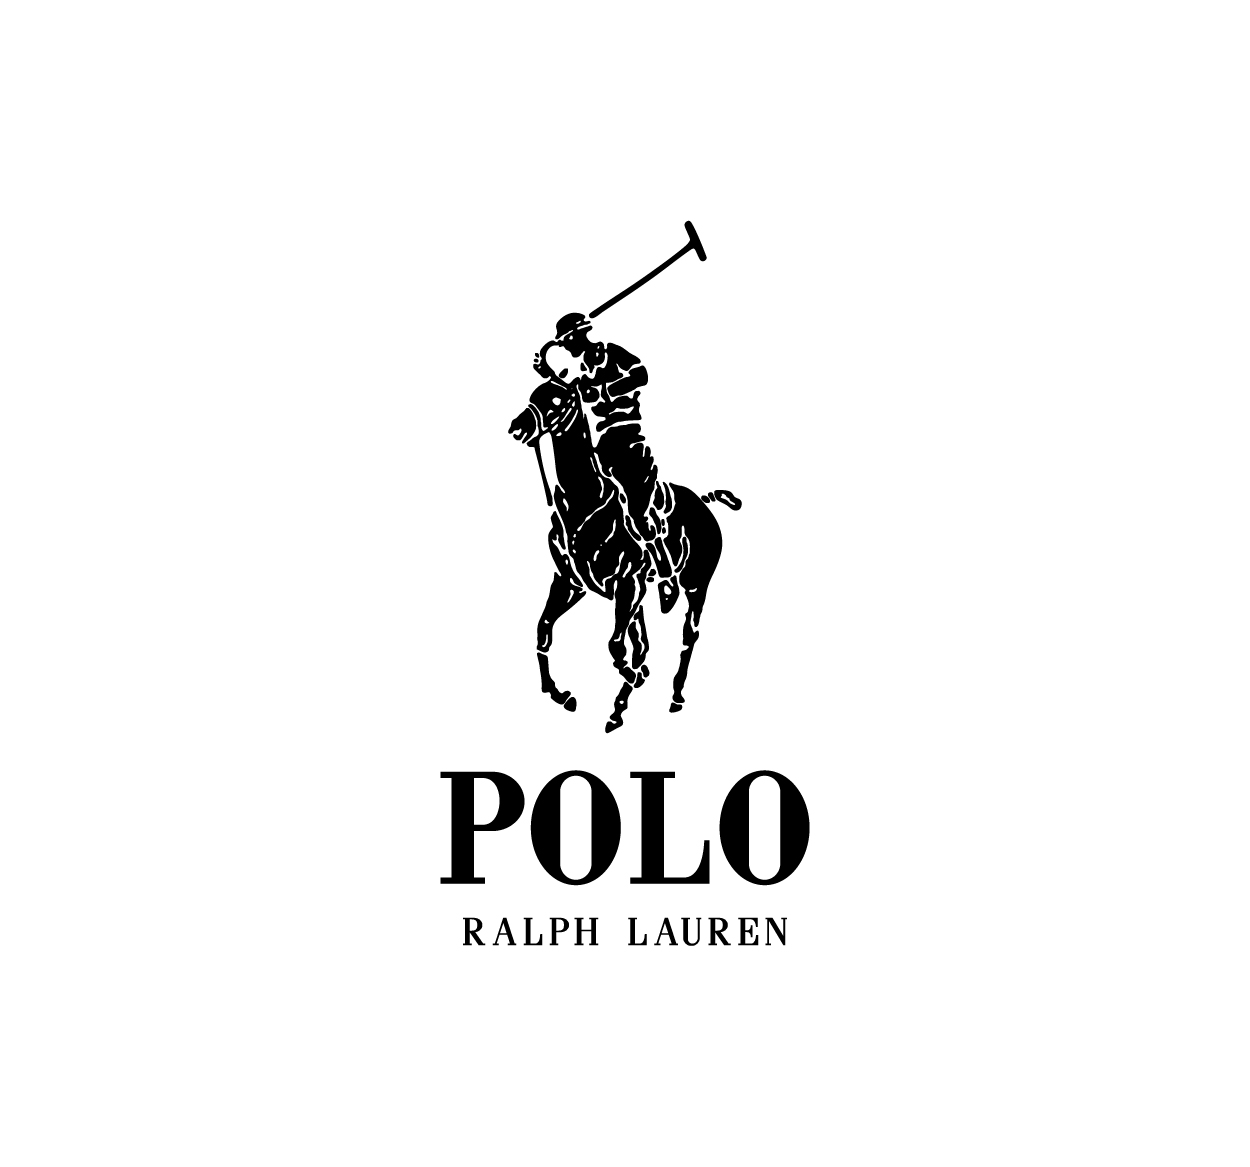 Download Polo logo vectors in SVG Vector or PNG